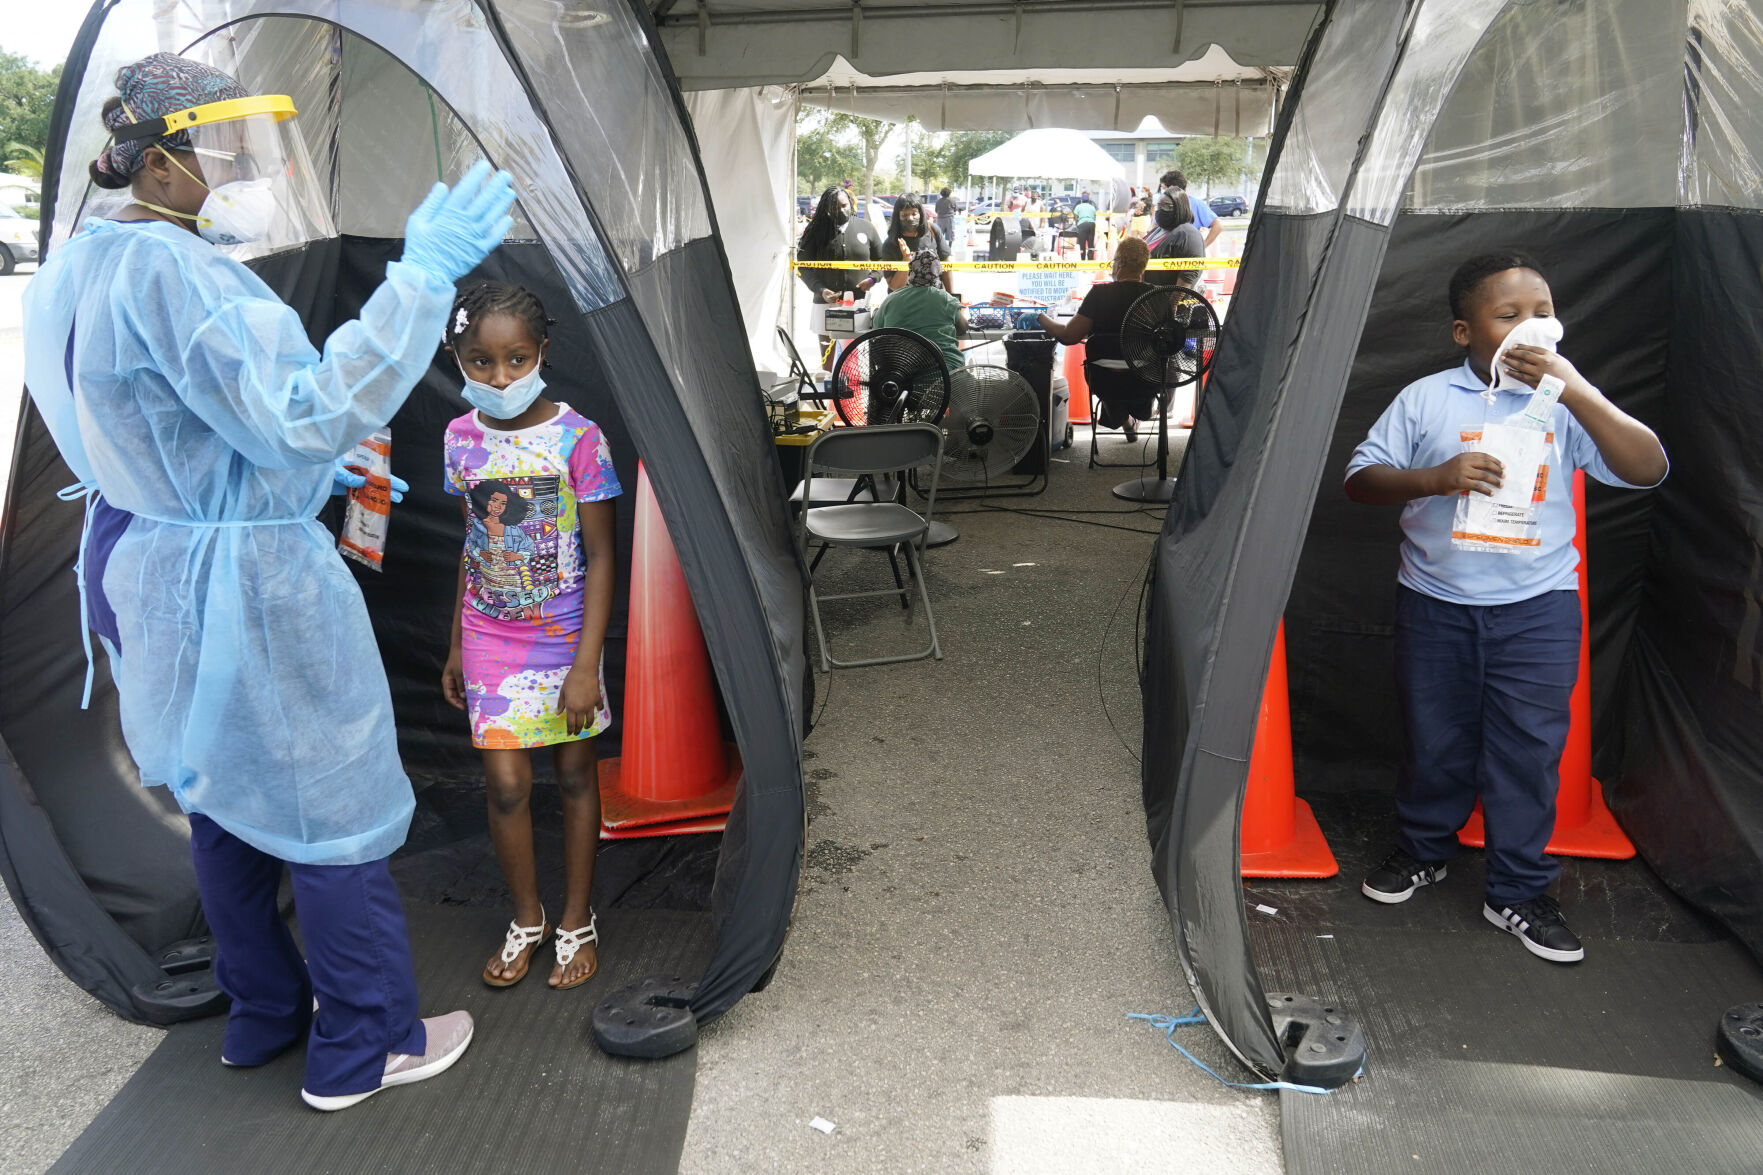 <p>FILE - Wenderson Cerisene, 7, right, and his sister Dorah, 9, wait to be tested for COVID-19, Aug. 31, 2021, in North Miami, Fla. In interviews with The Associated Press, close to 50 school leaders, teachers, parents and health officials reflected on decisions to keep students in extended online learning, especially during the spring semester of 2021. (AP Photo/Marta Lavandier, File)</p>   PHOTO CREDIT: Marta Lavandier - staff, AP